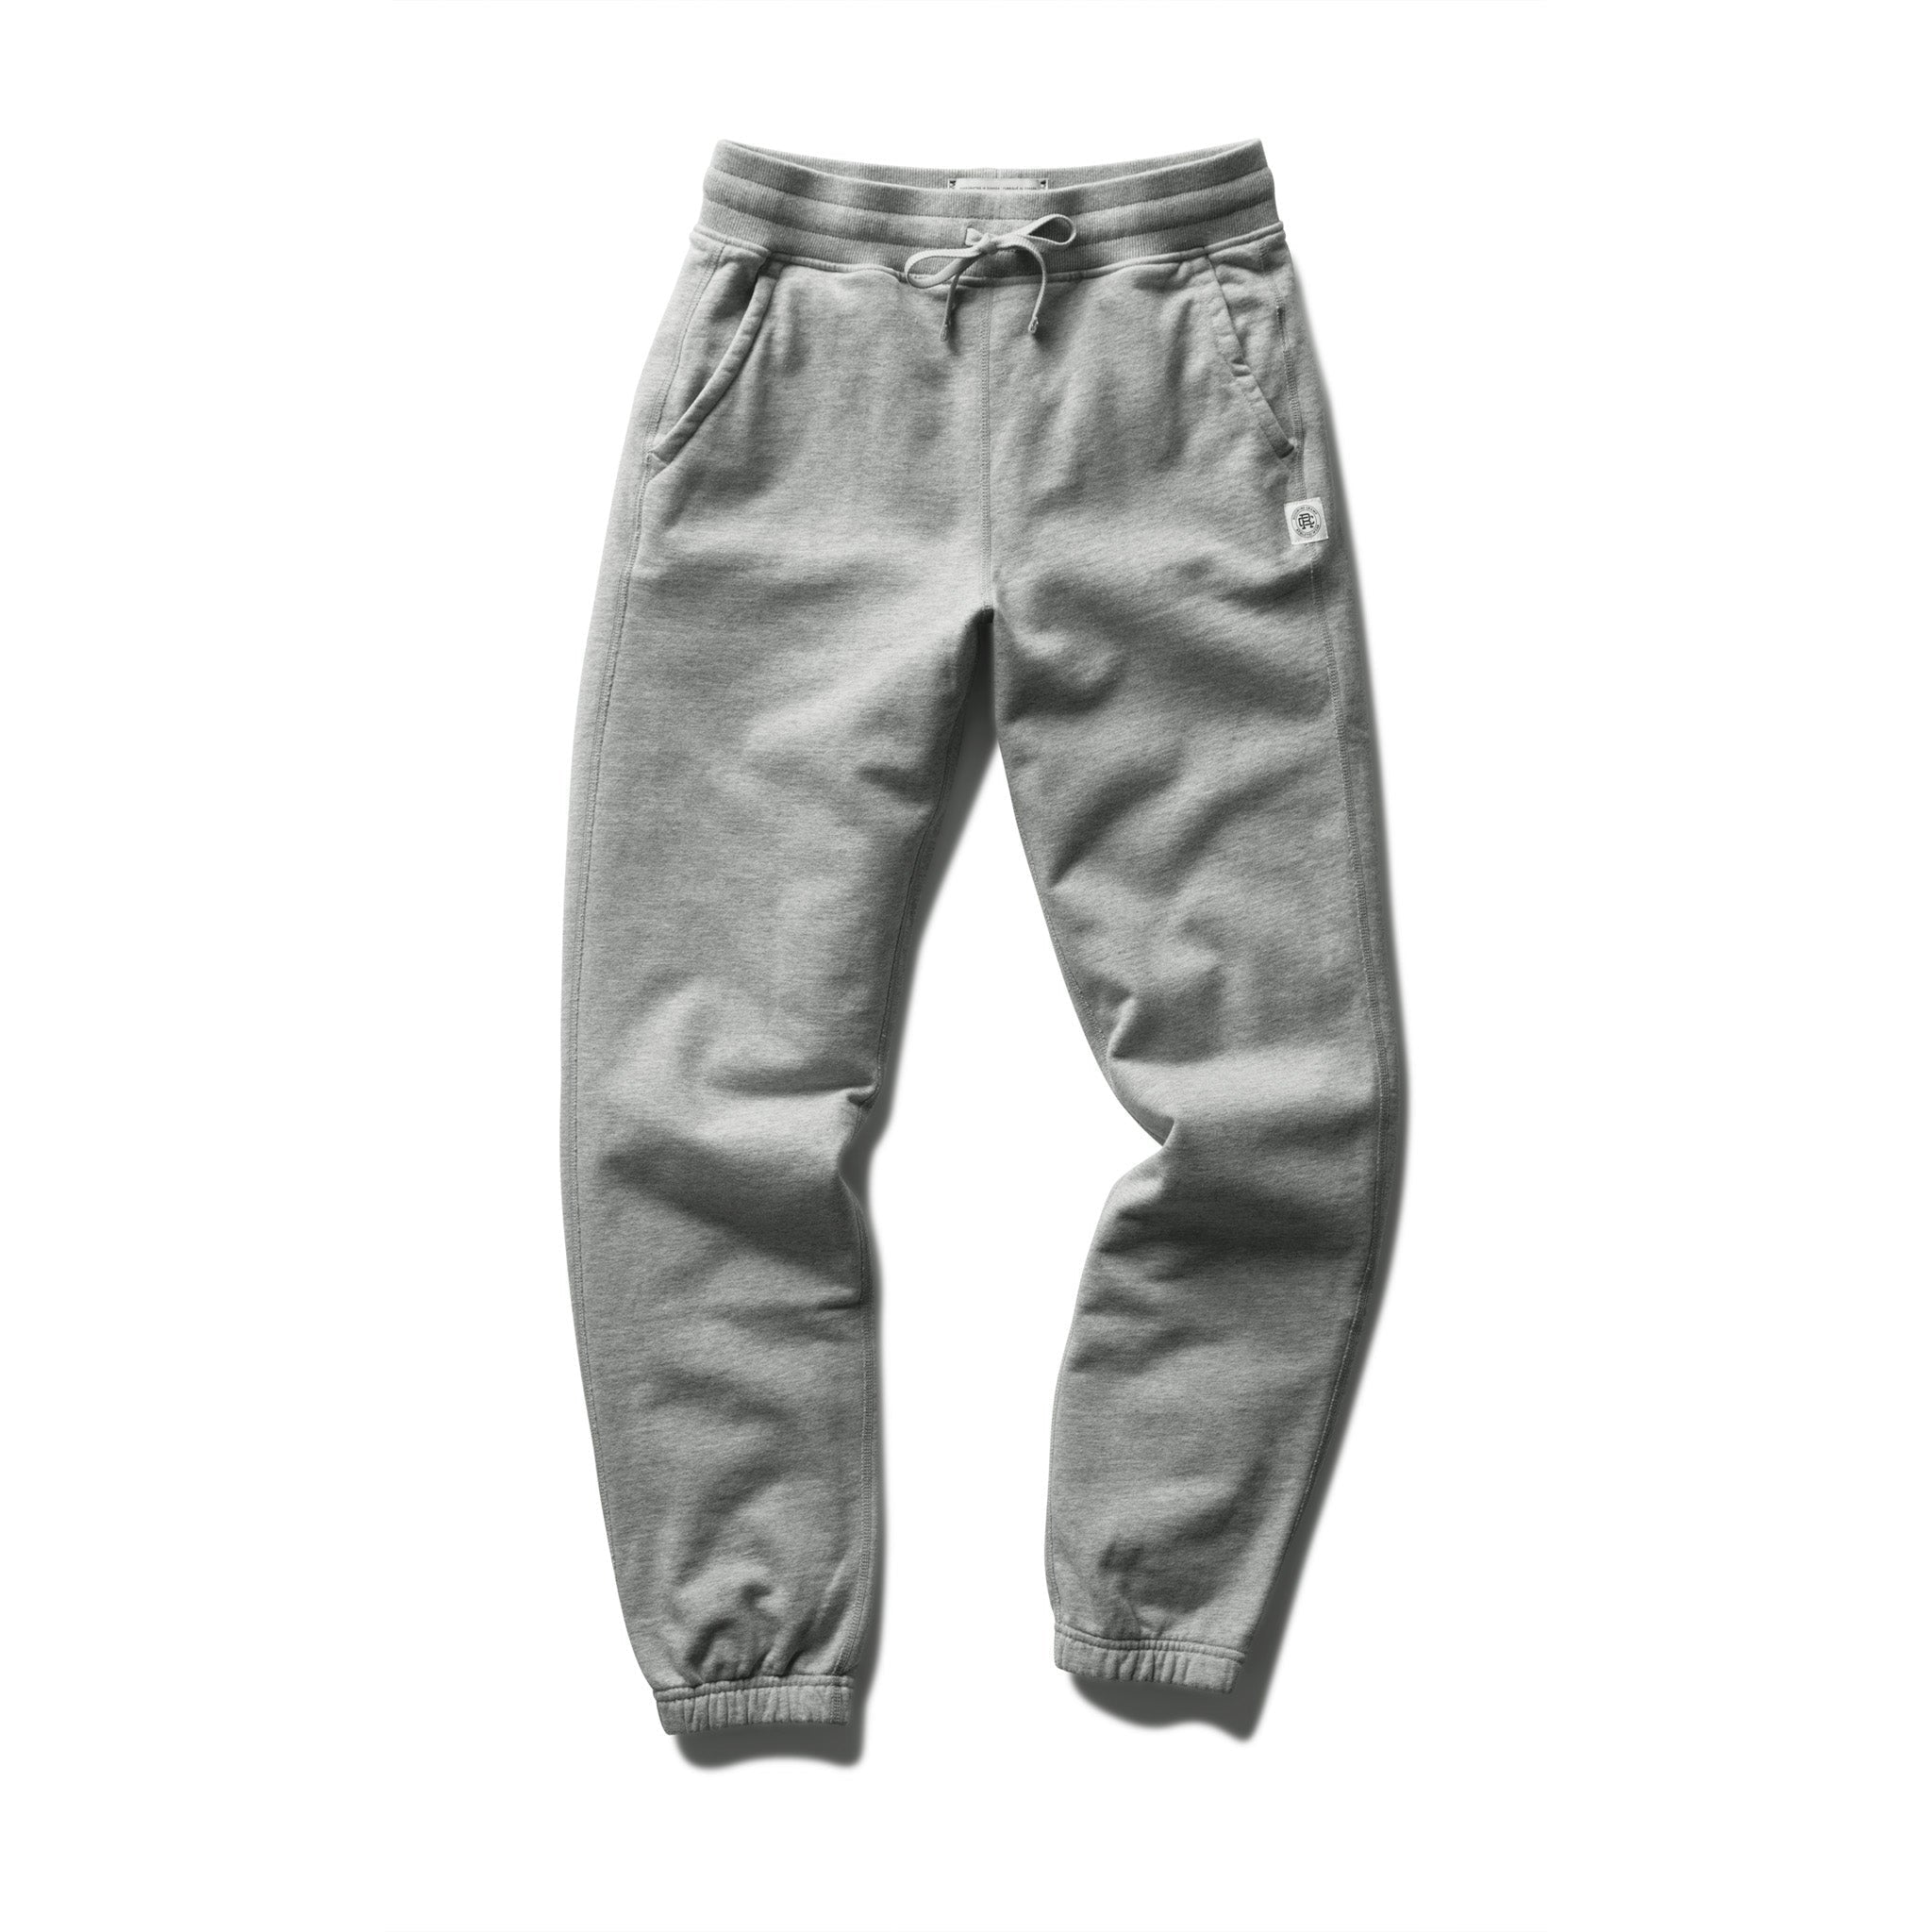 Reigning Champ Men Lightweight Terry Cuffed Sweatpant Black RC-5443-HGRY - BOTTOMS - Canada